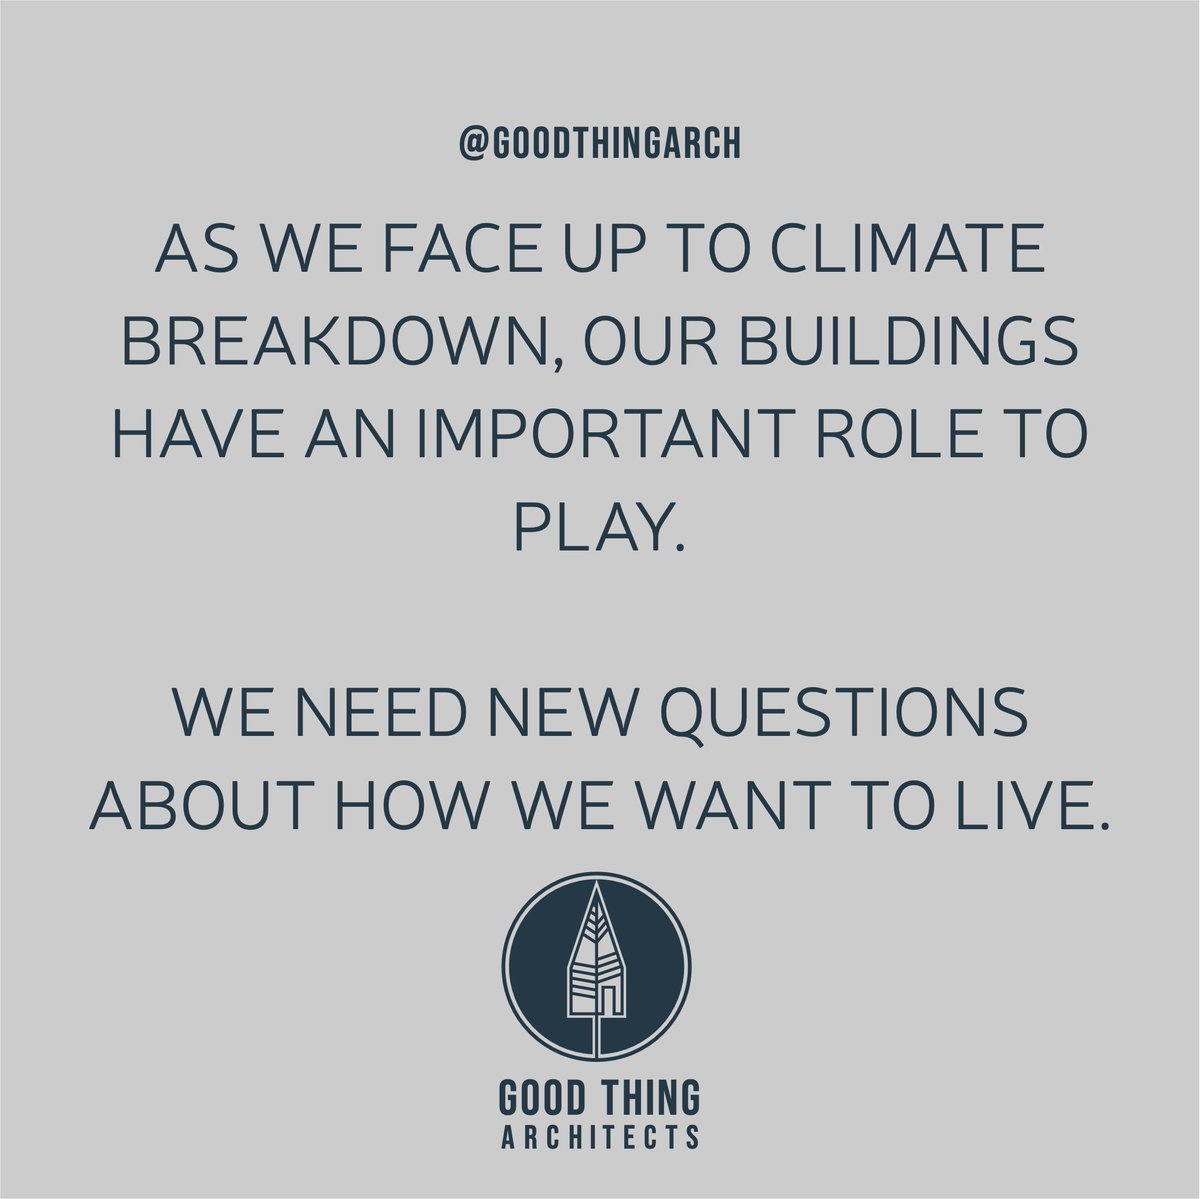 New questions... #ArchitectureAsGift #Health #Sustainability #ClimateBreakdown #DoAGoodThing #Housing